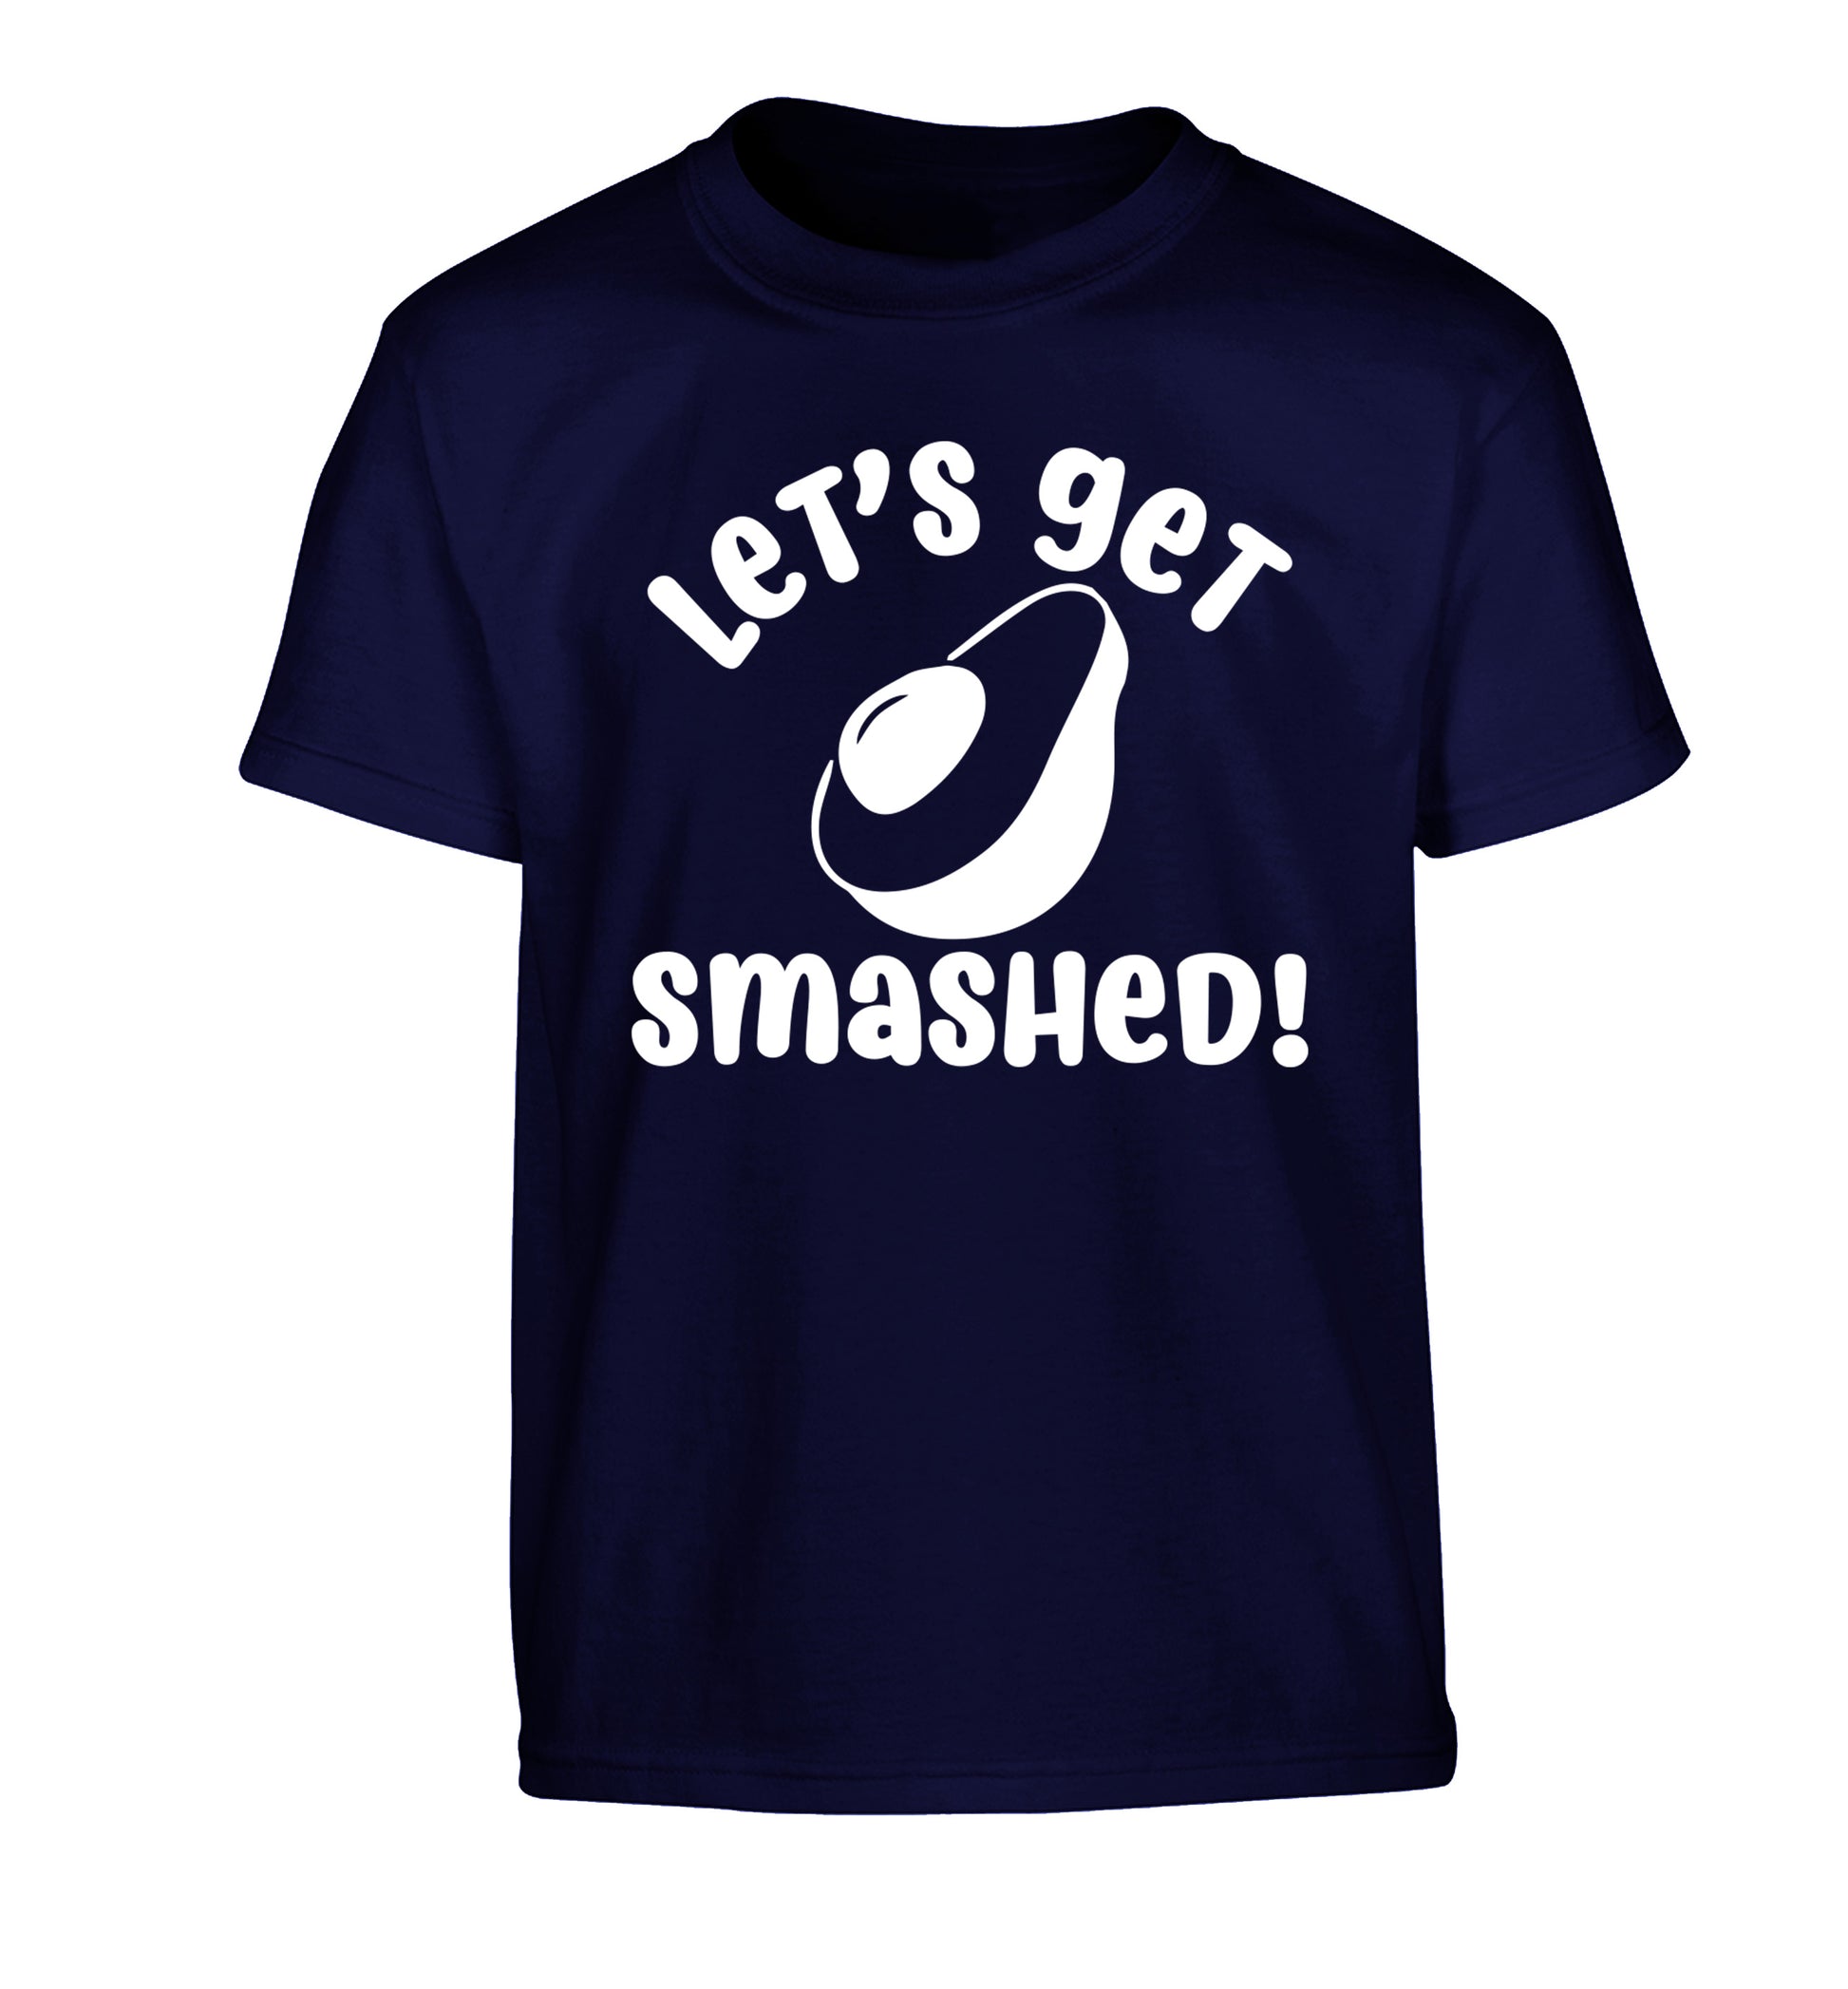 Let's get smashed Children's navy Tshirt 12-14 Years